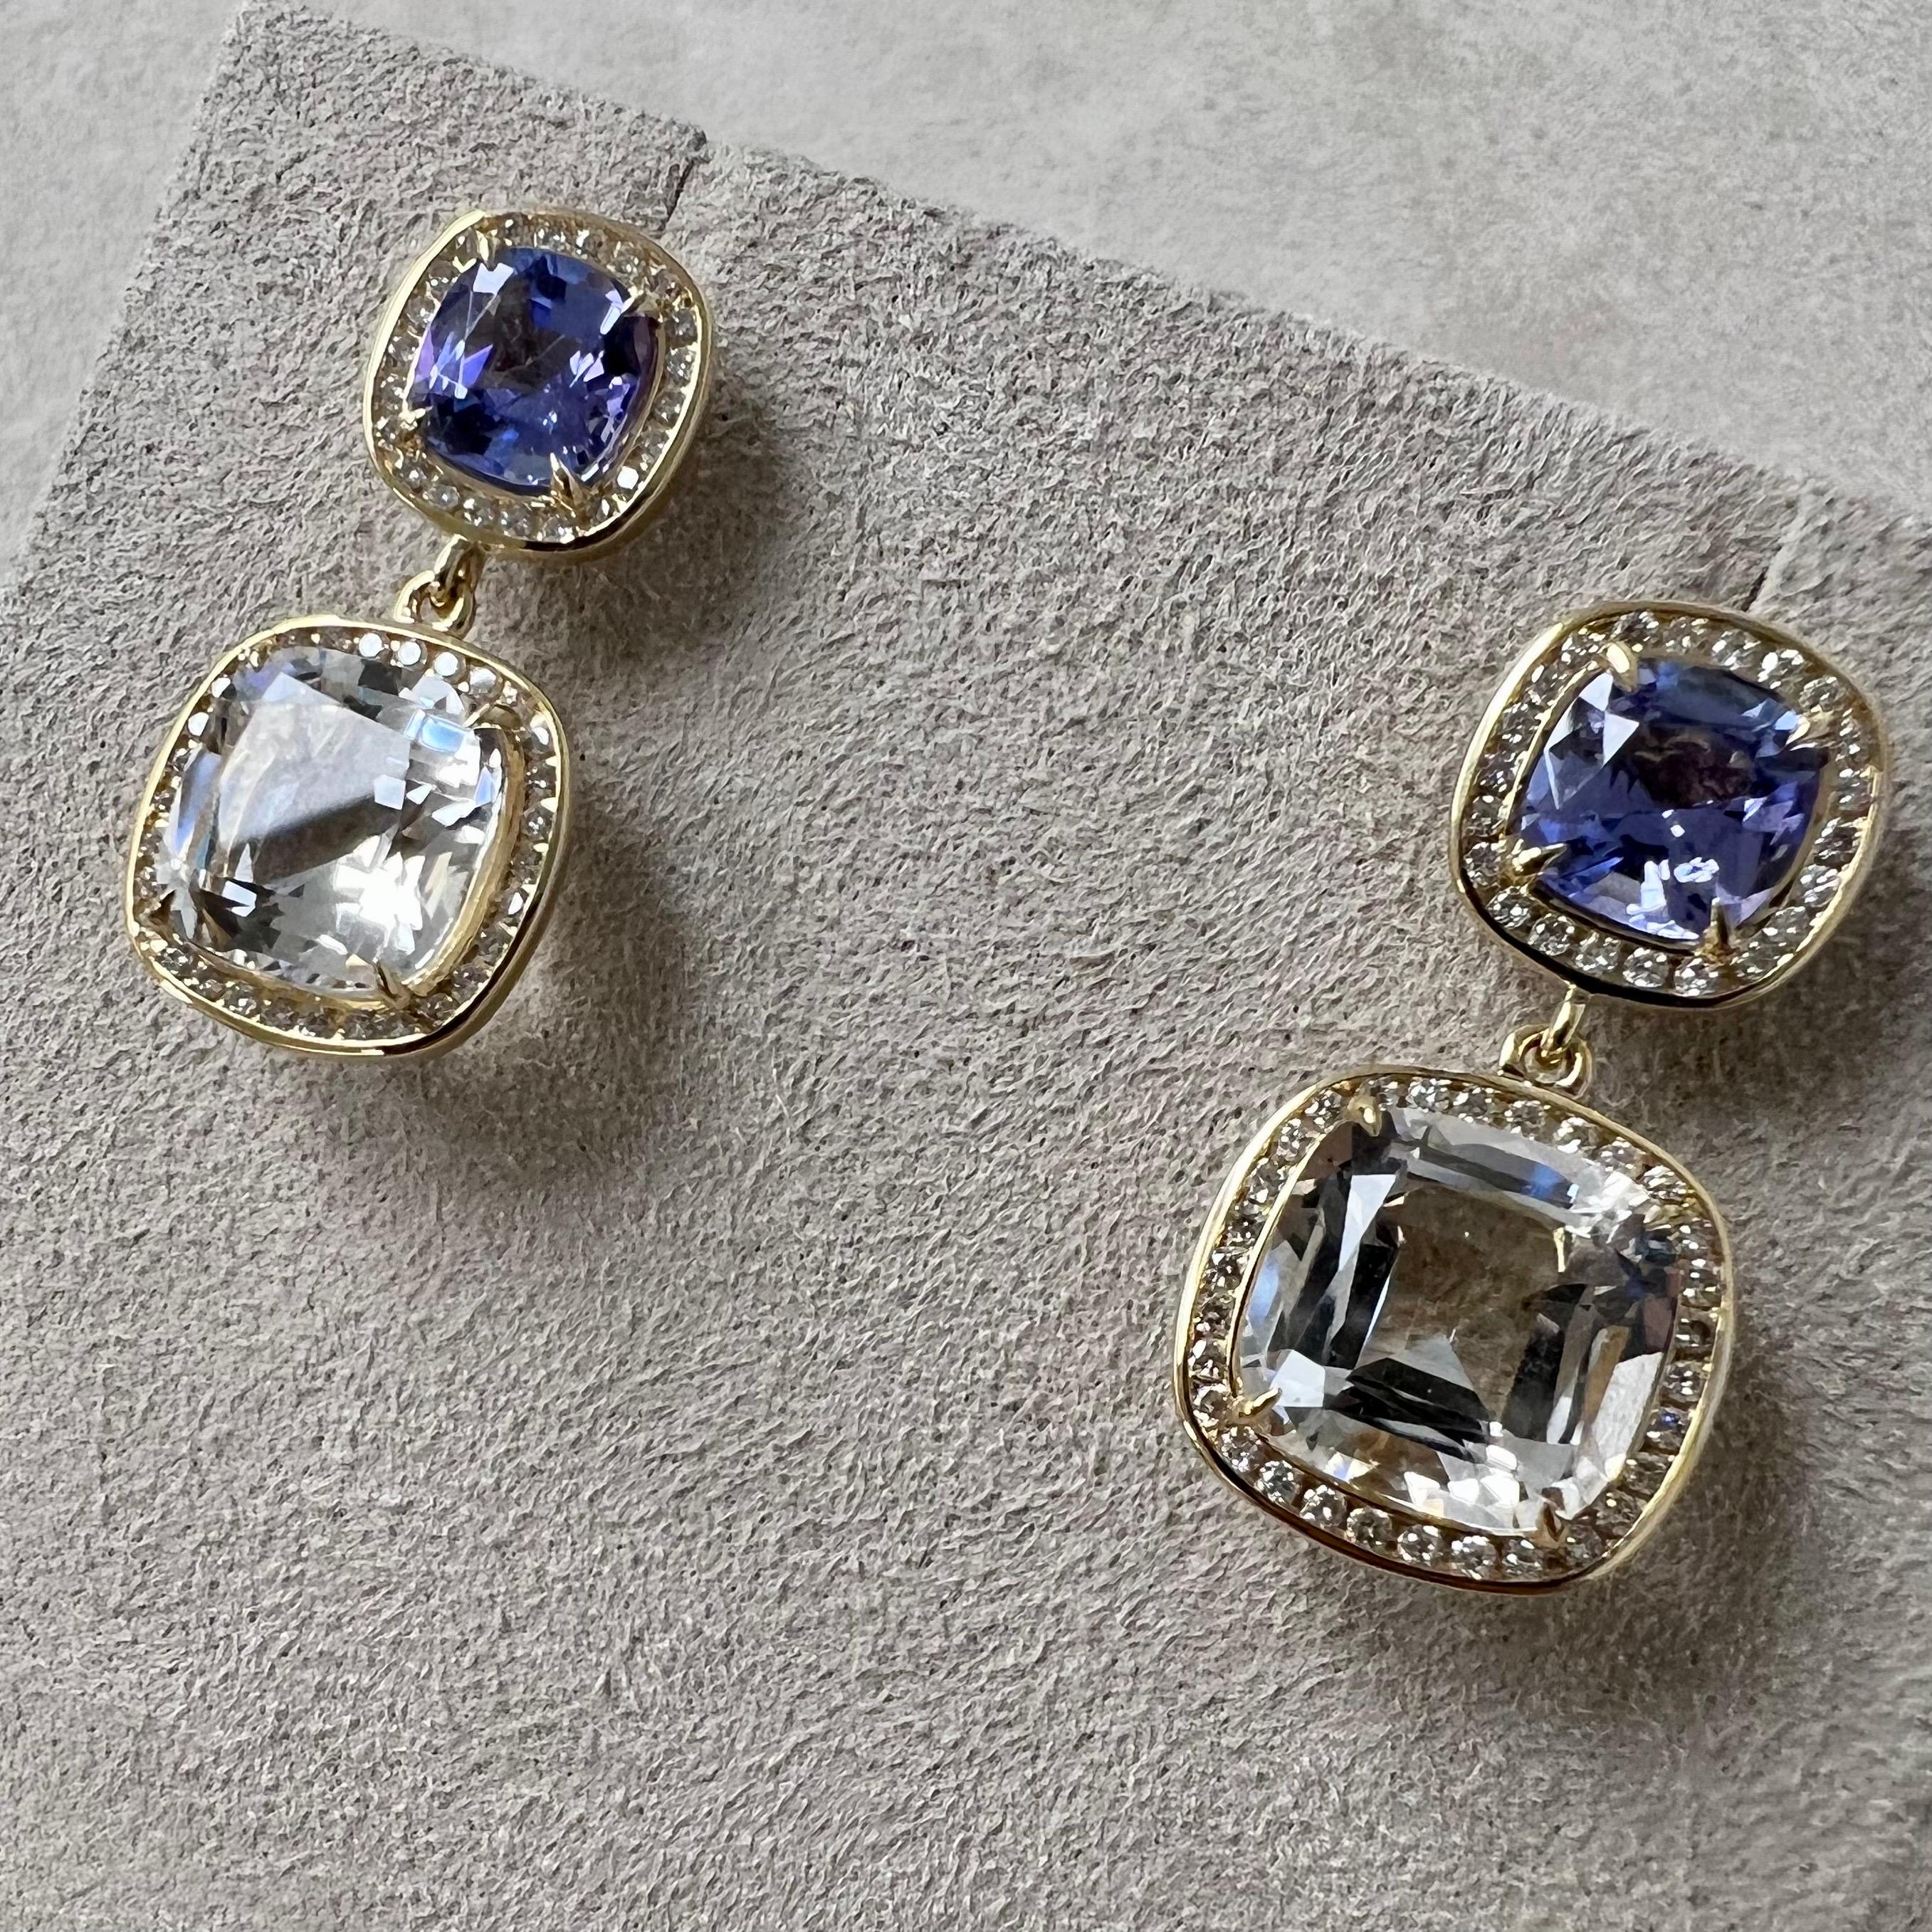 Contemporary Syna Yellow Gold Rock Crystal & Tanzanite Earrings with Diamonds